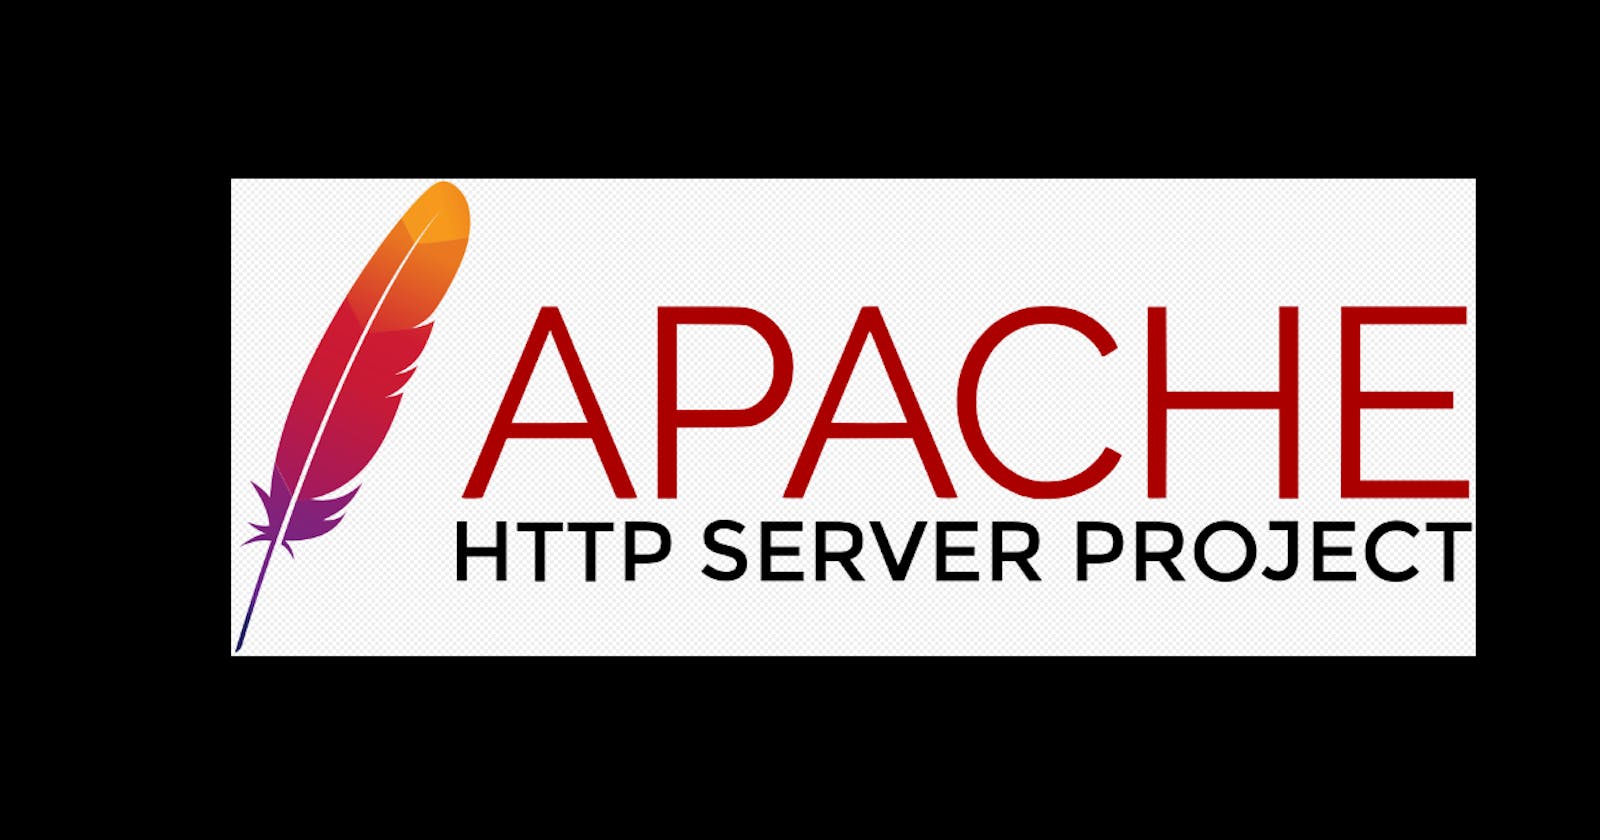 Deploy a customized web application using an Apache HTTP Server.